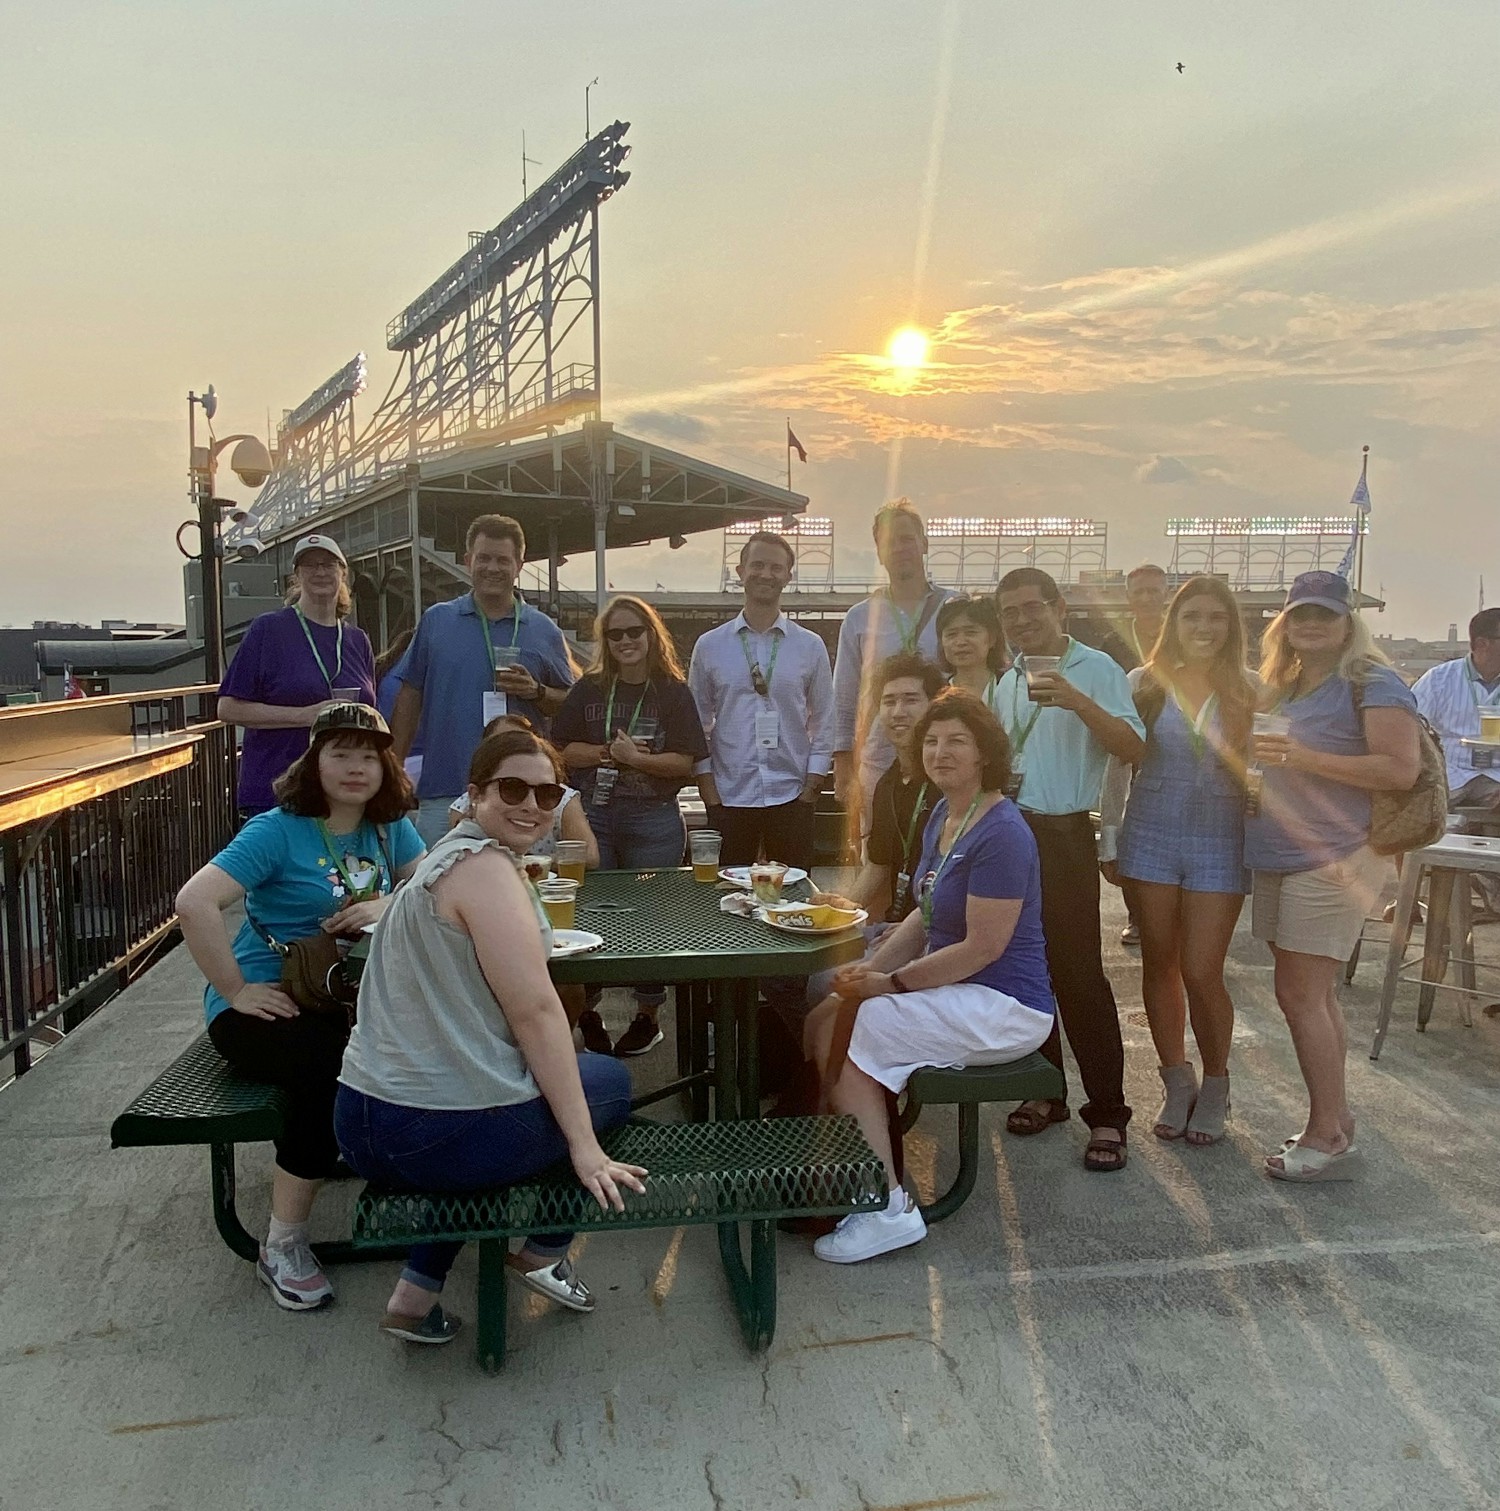 Take me out to the ball game! Supernova celebrates being back together in-person at a Cubs Rooftop event.